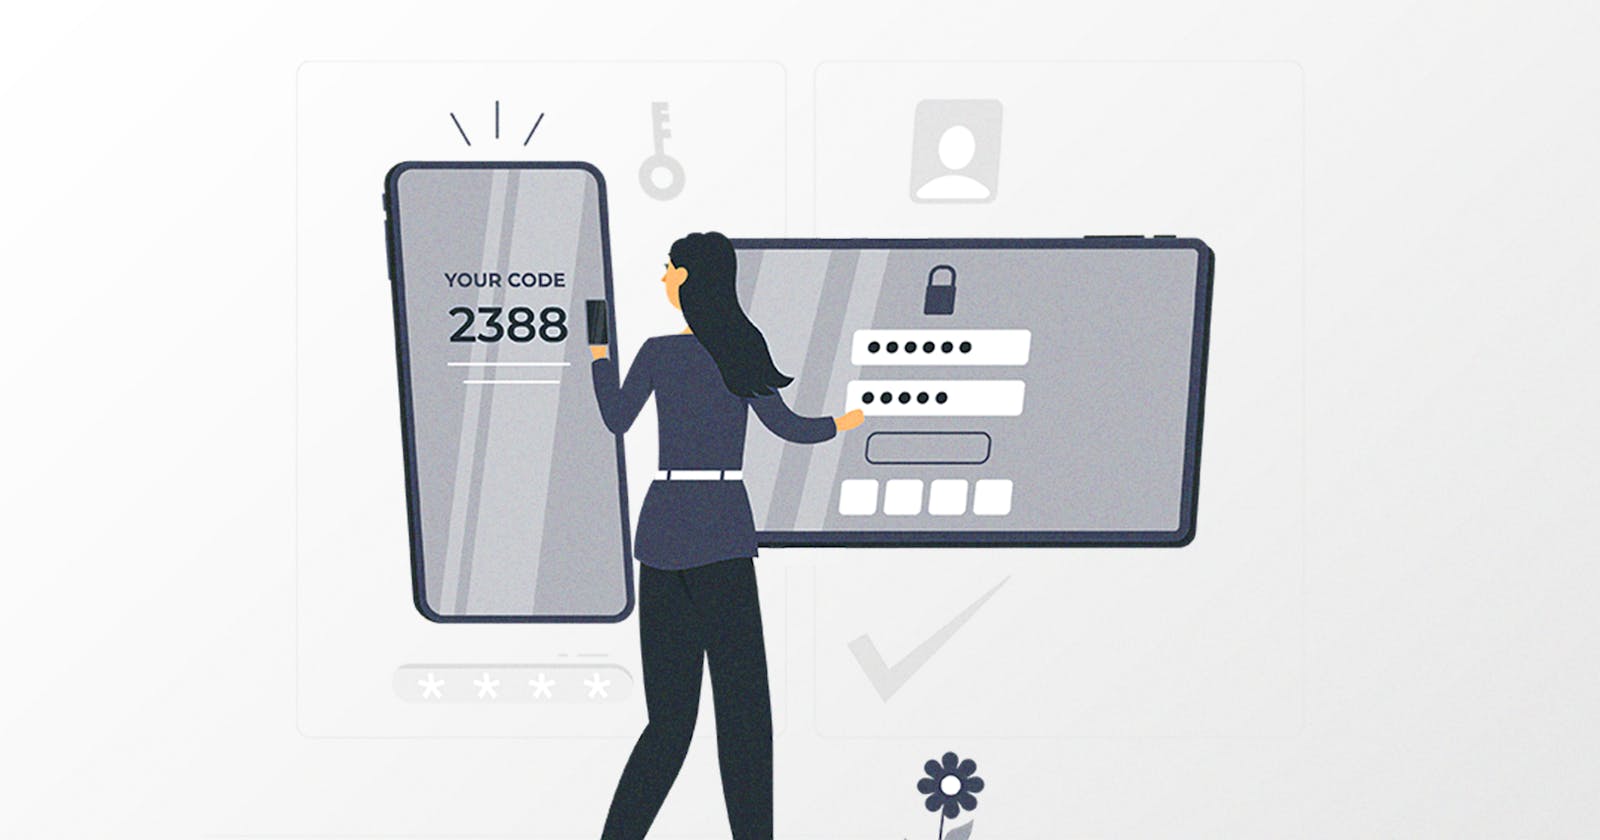 Enhancing Security with Two-Factor Authentication (2FA)